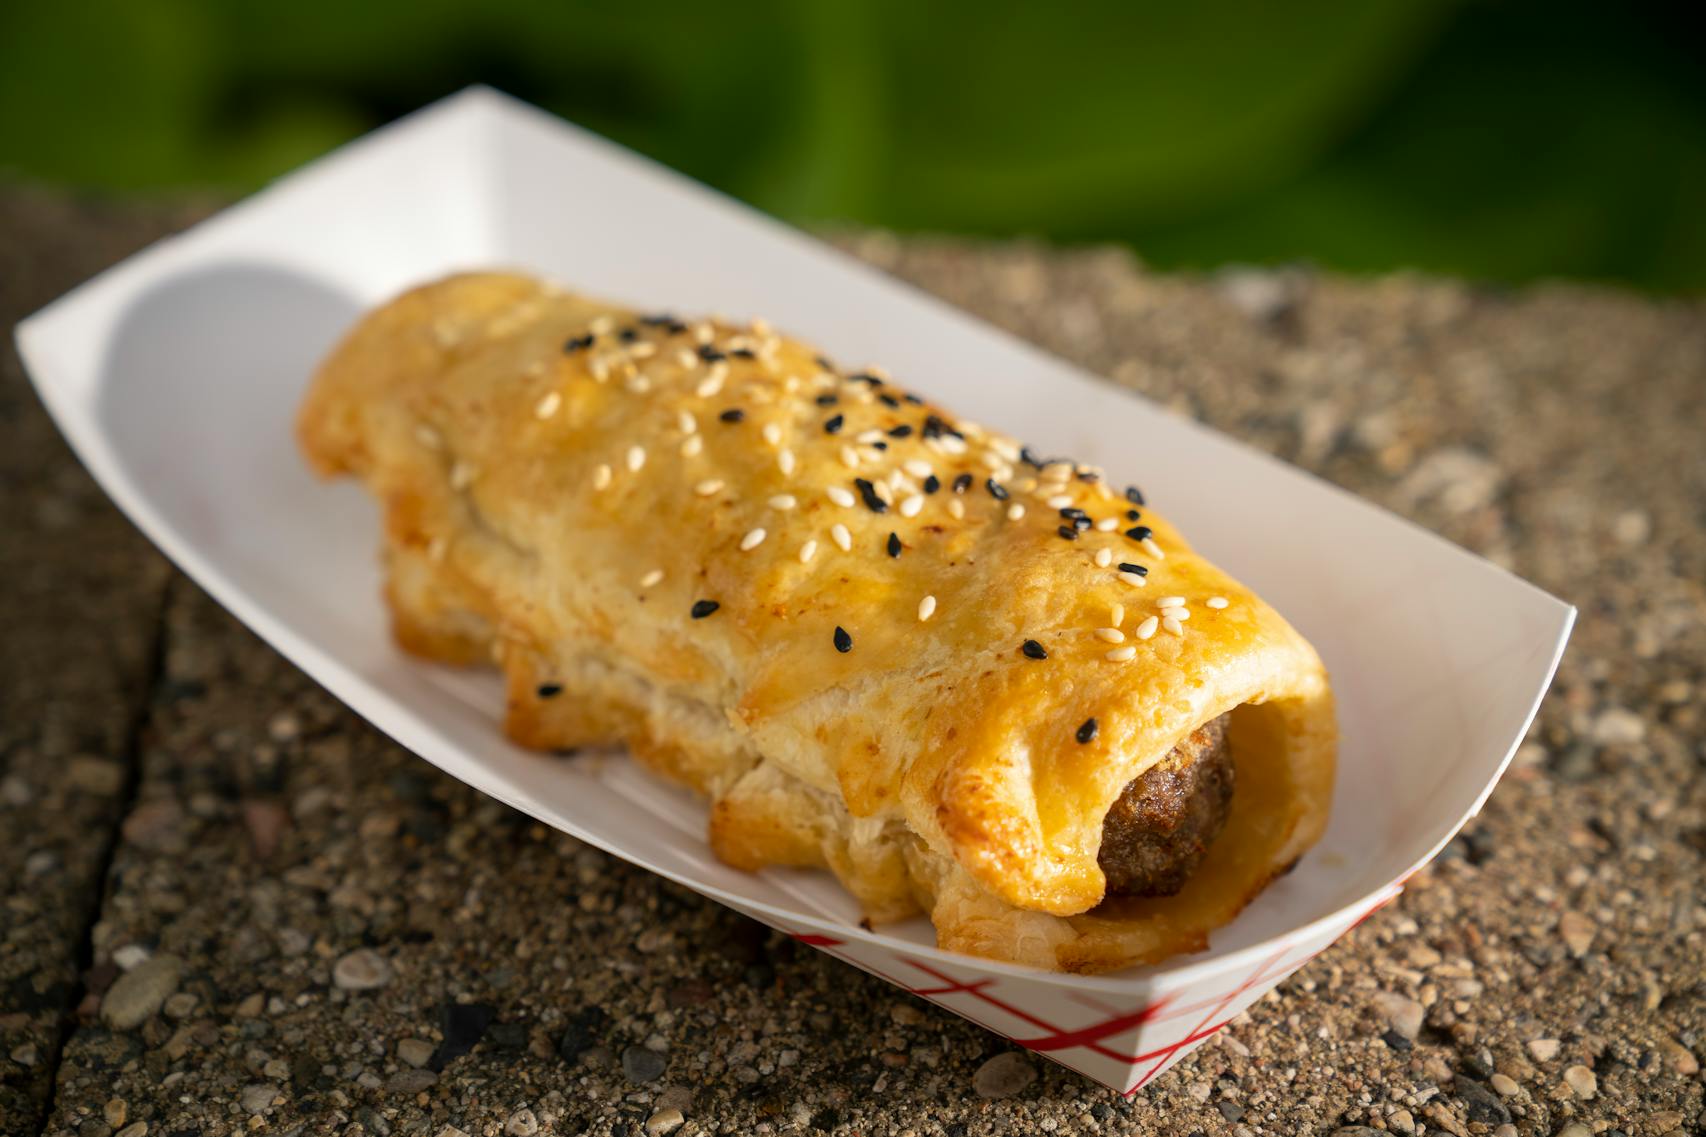 A Rockin’ Sausage Roll from Sausage Sister & Me. The new foods of the 2023 Minnesota State Fair photographed on the first day of the fair in Falcon Heights, Minn. on Tuesday, Aug. 8, 2023. ] LEILA NAVIDI • leila.navidi@startribune.com